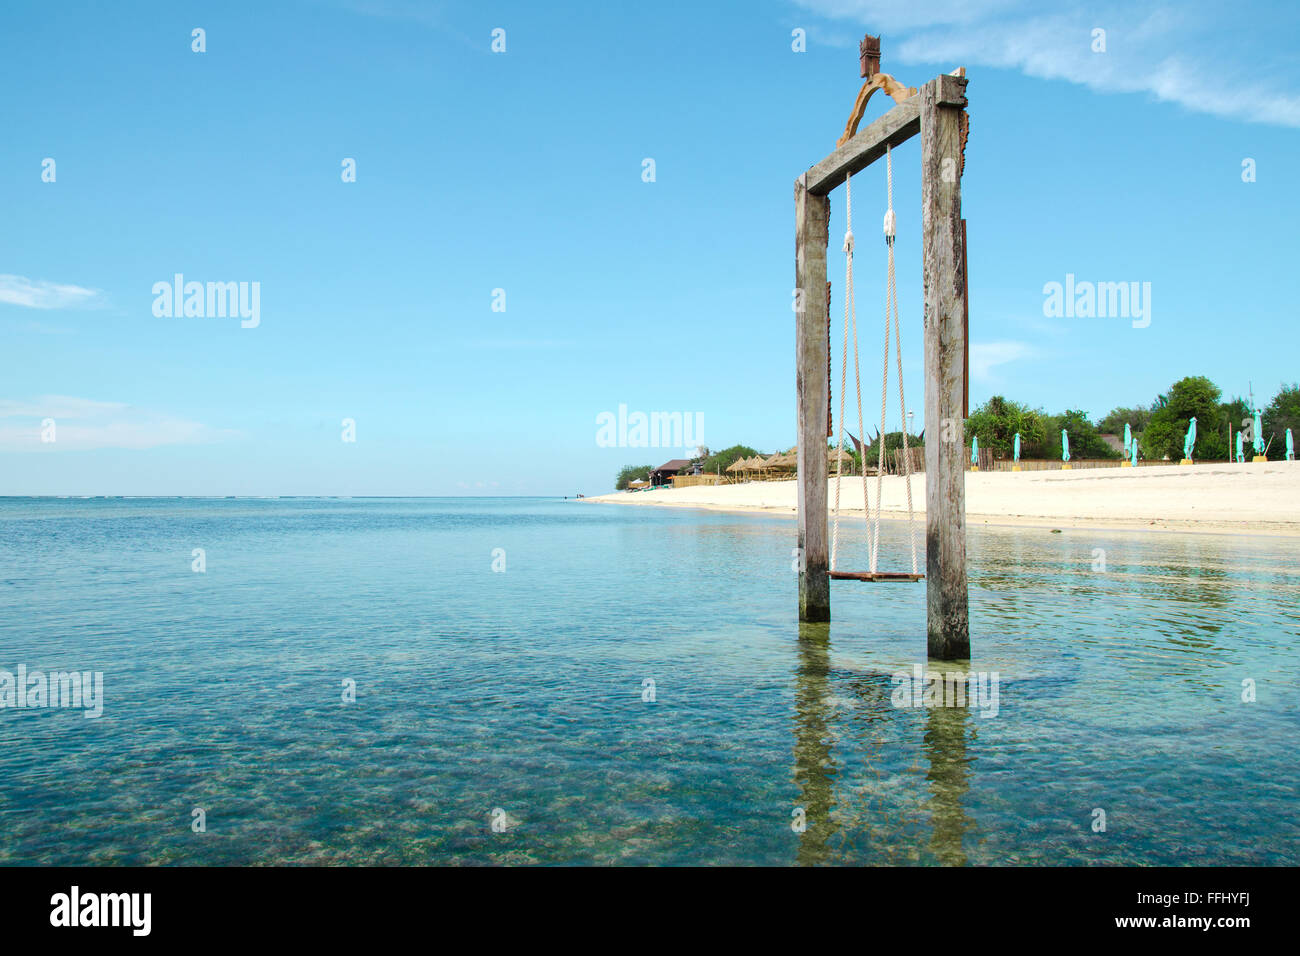 Bali, Indonesia. Exotic beach. Swing located in the ocean near the island of Gili. Stock Image Stock Photo